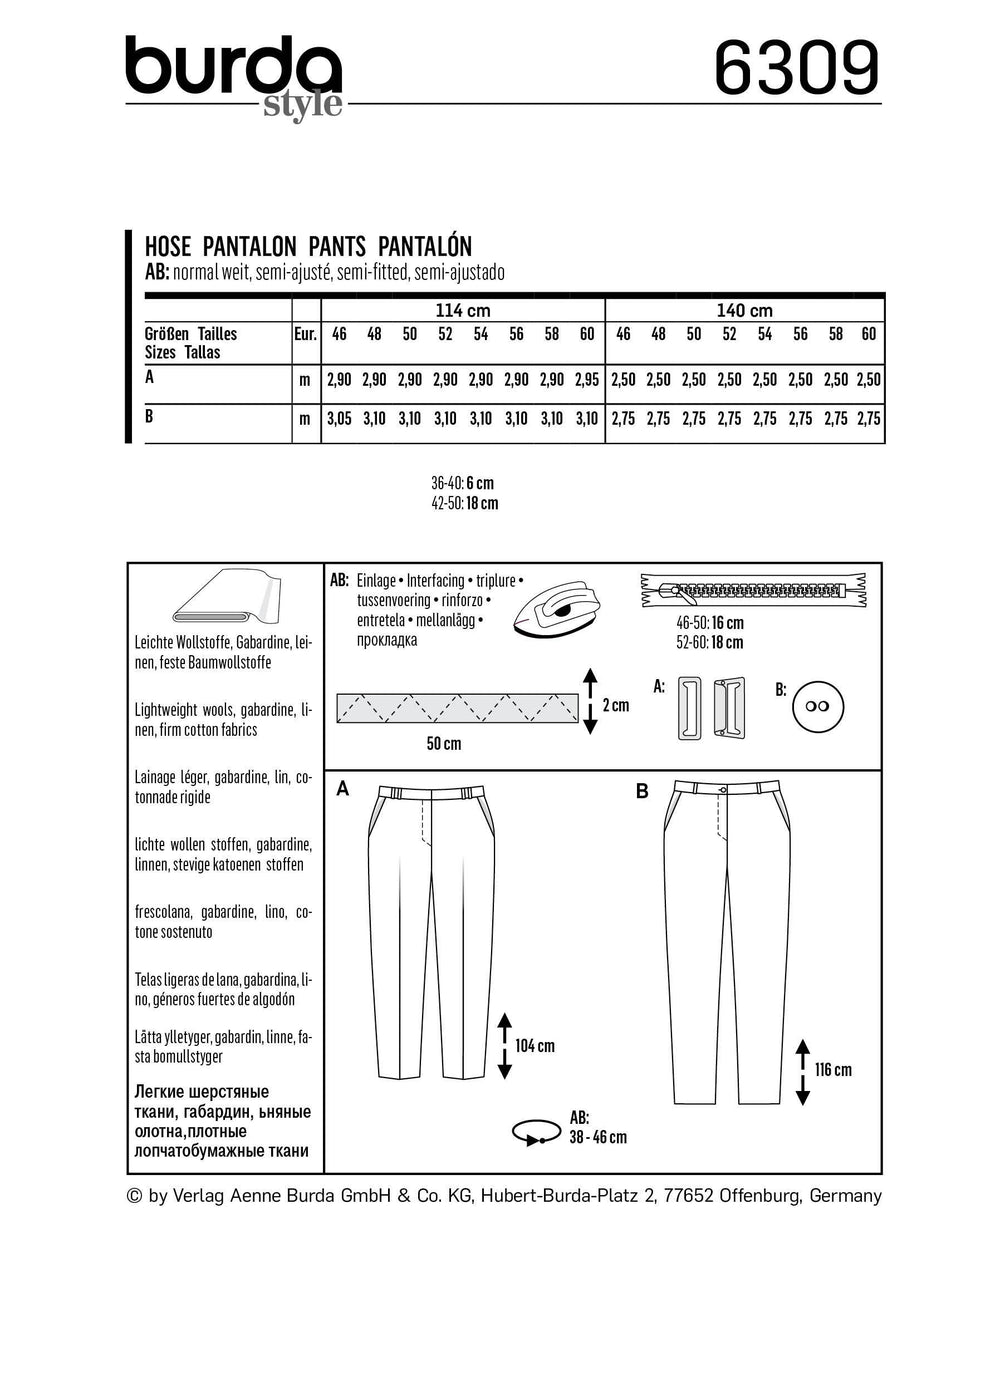 BD6309 Women's back elastic pants sewing pattern from Jaycotts Sewing Supplies